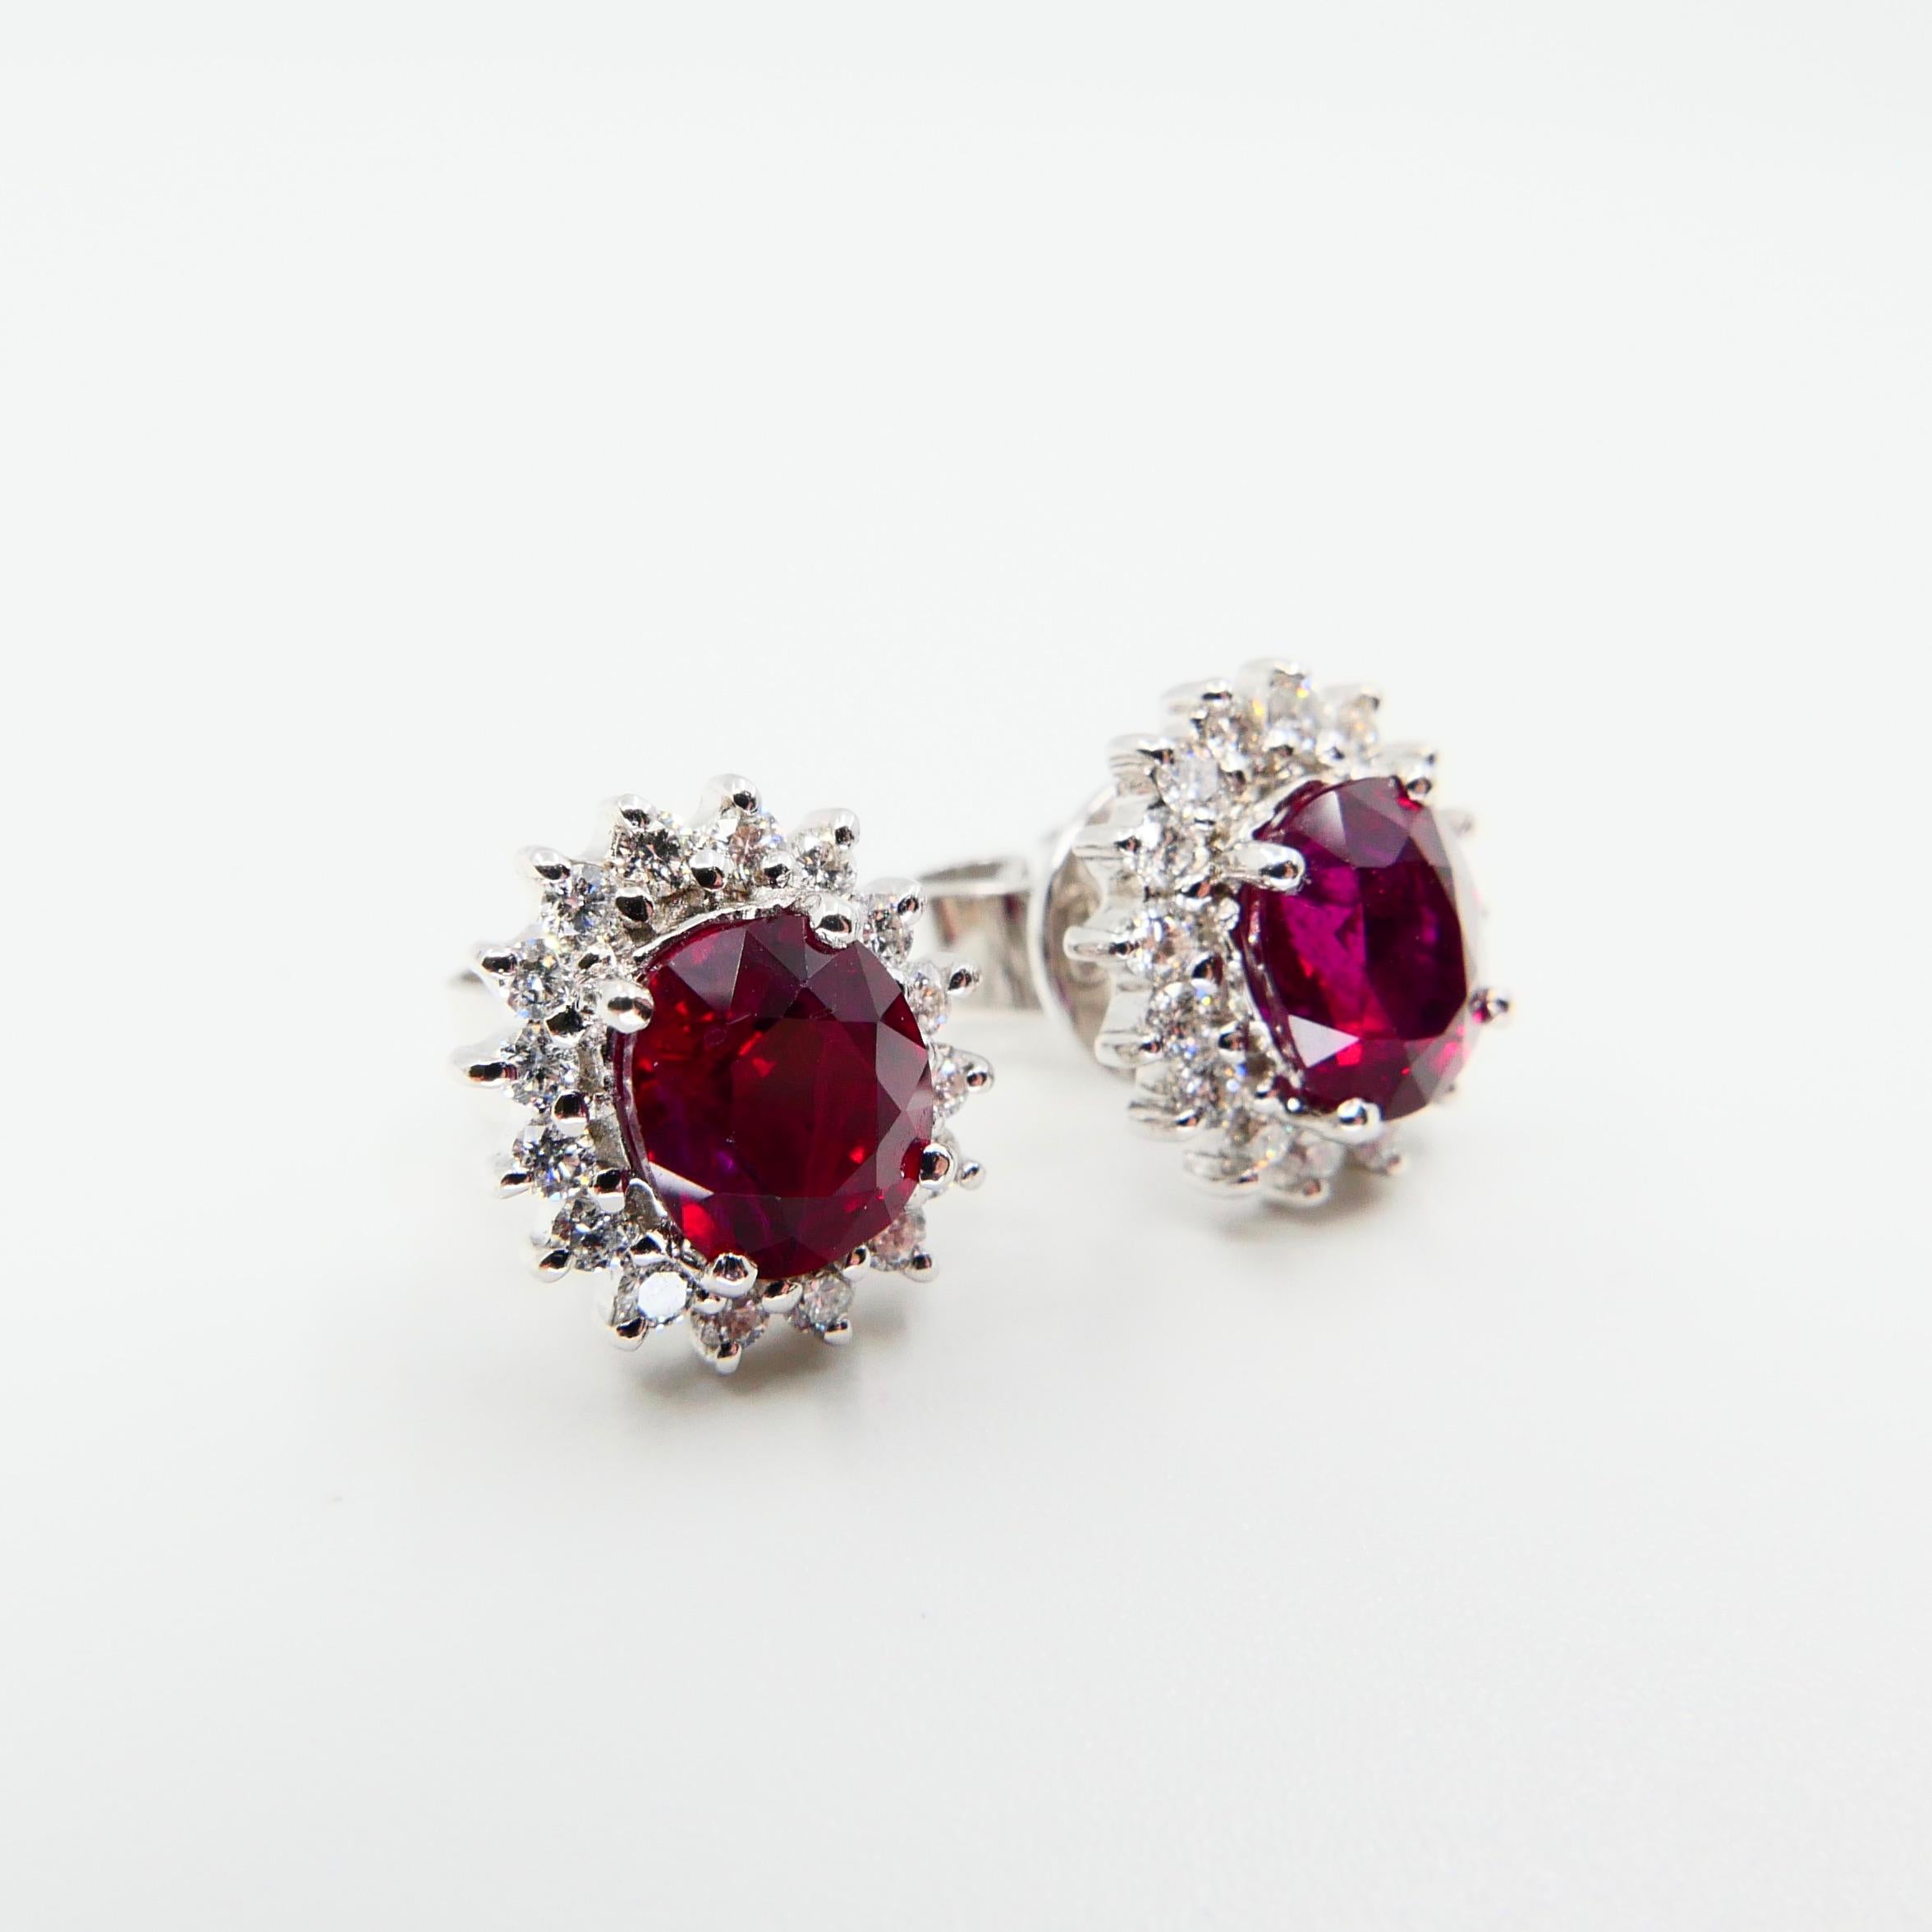 Vivid Red Ruby 2.09 Carat and Diamond Stud Earrings, Close to Pigeon Blood Red 7